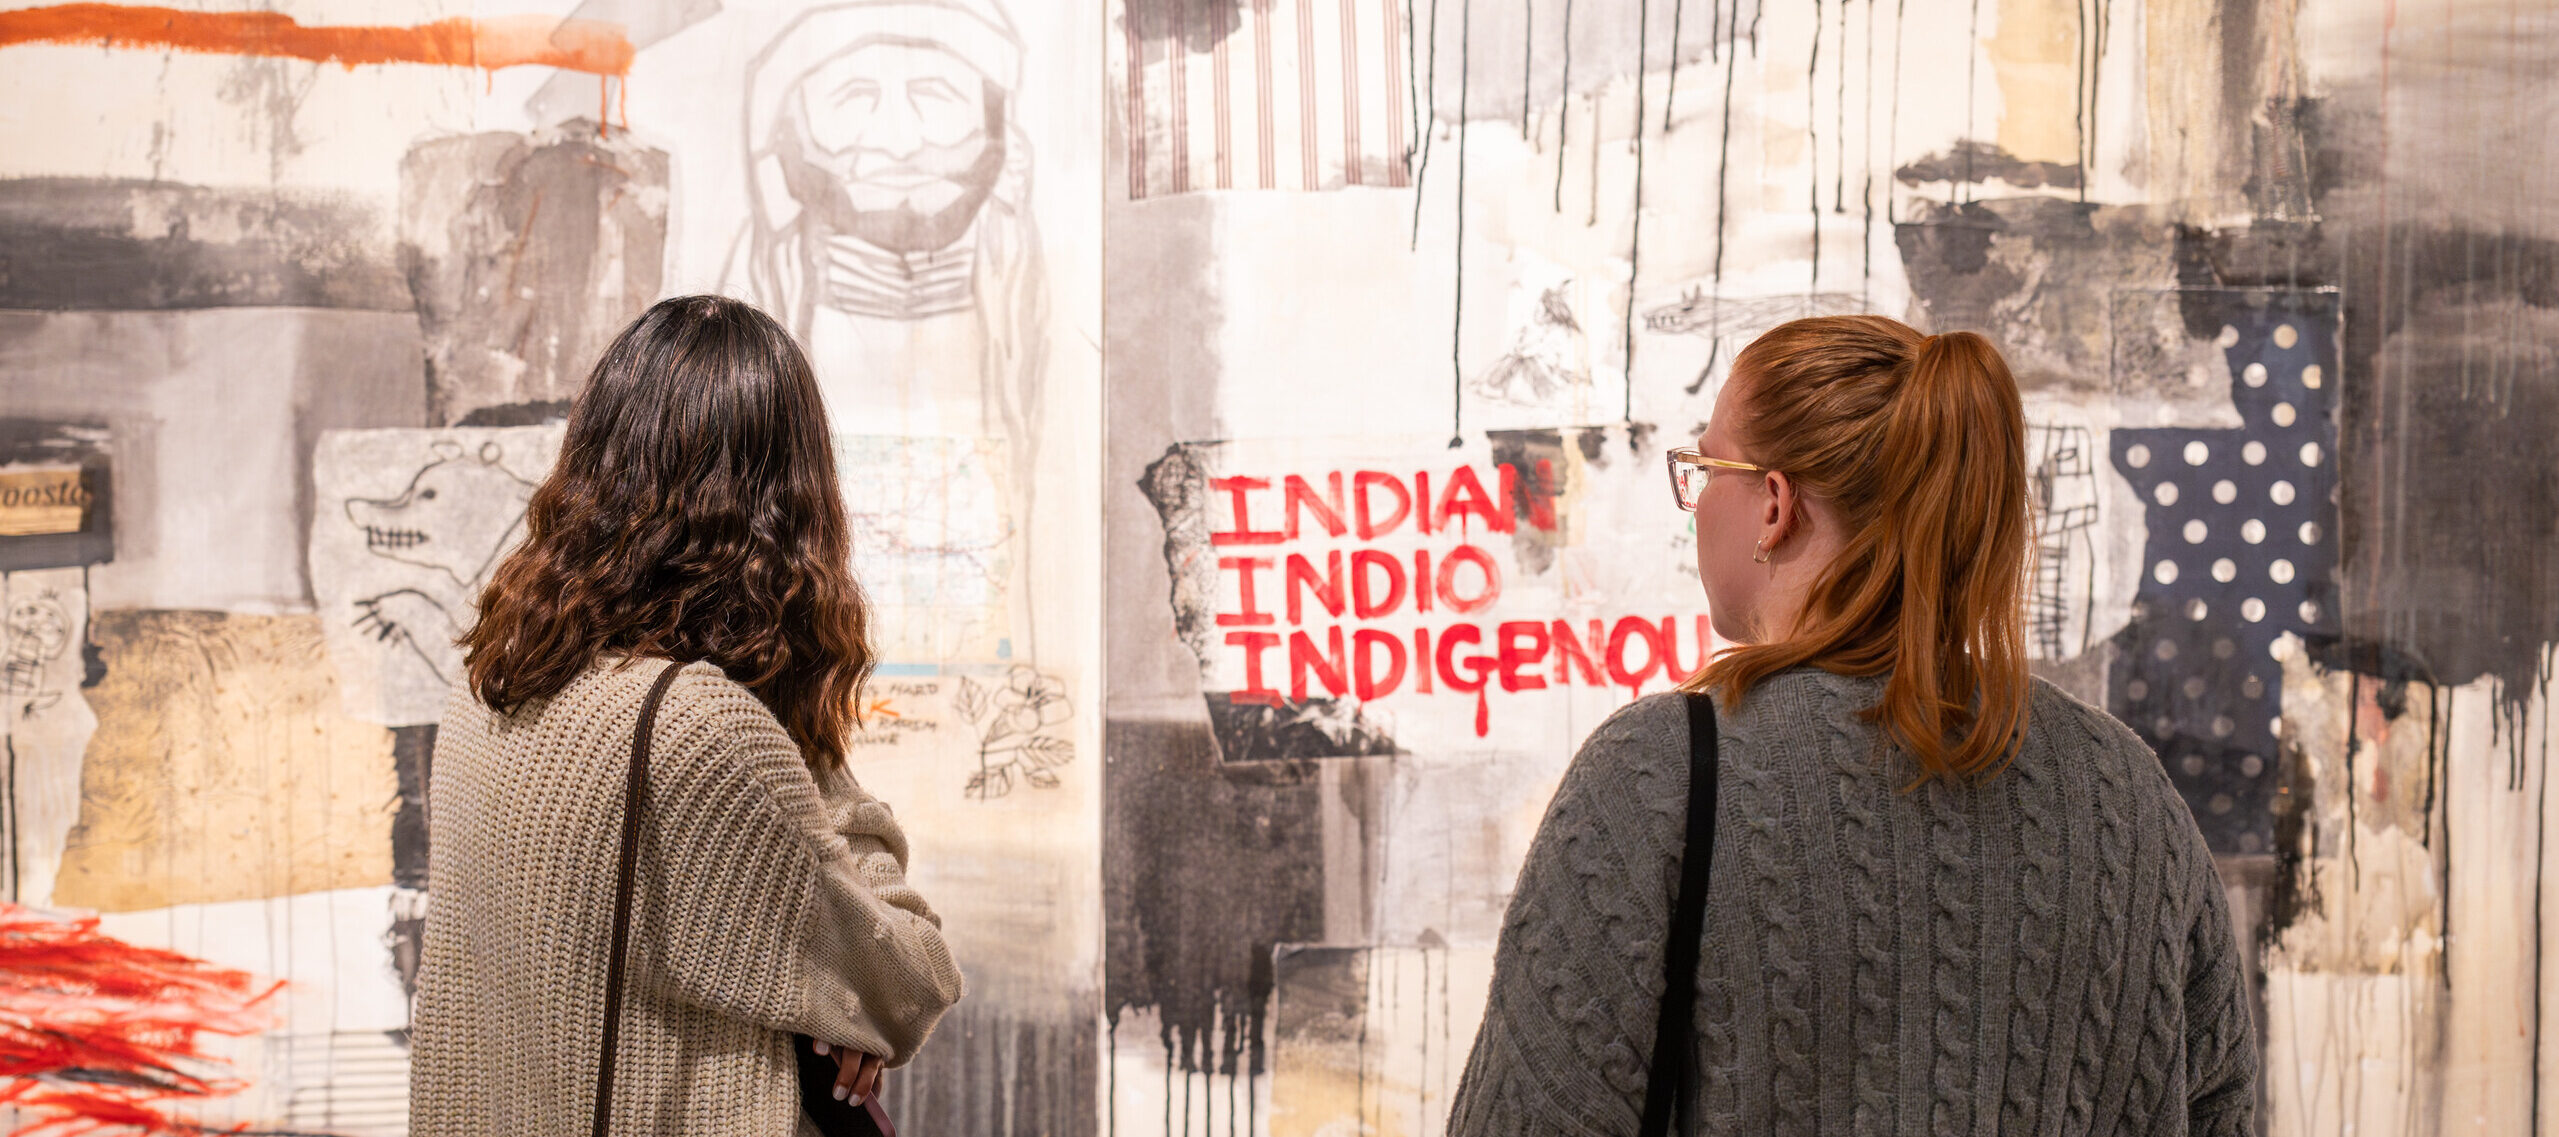 Two female visitors in grey sweaters look at an abstract painting. The painting is primarily beige and grey blocks of color, and the words "Indian" "Indio" and "Indigenous" are written in red paint.